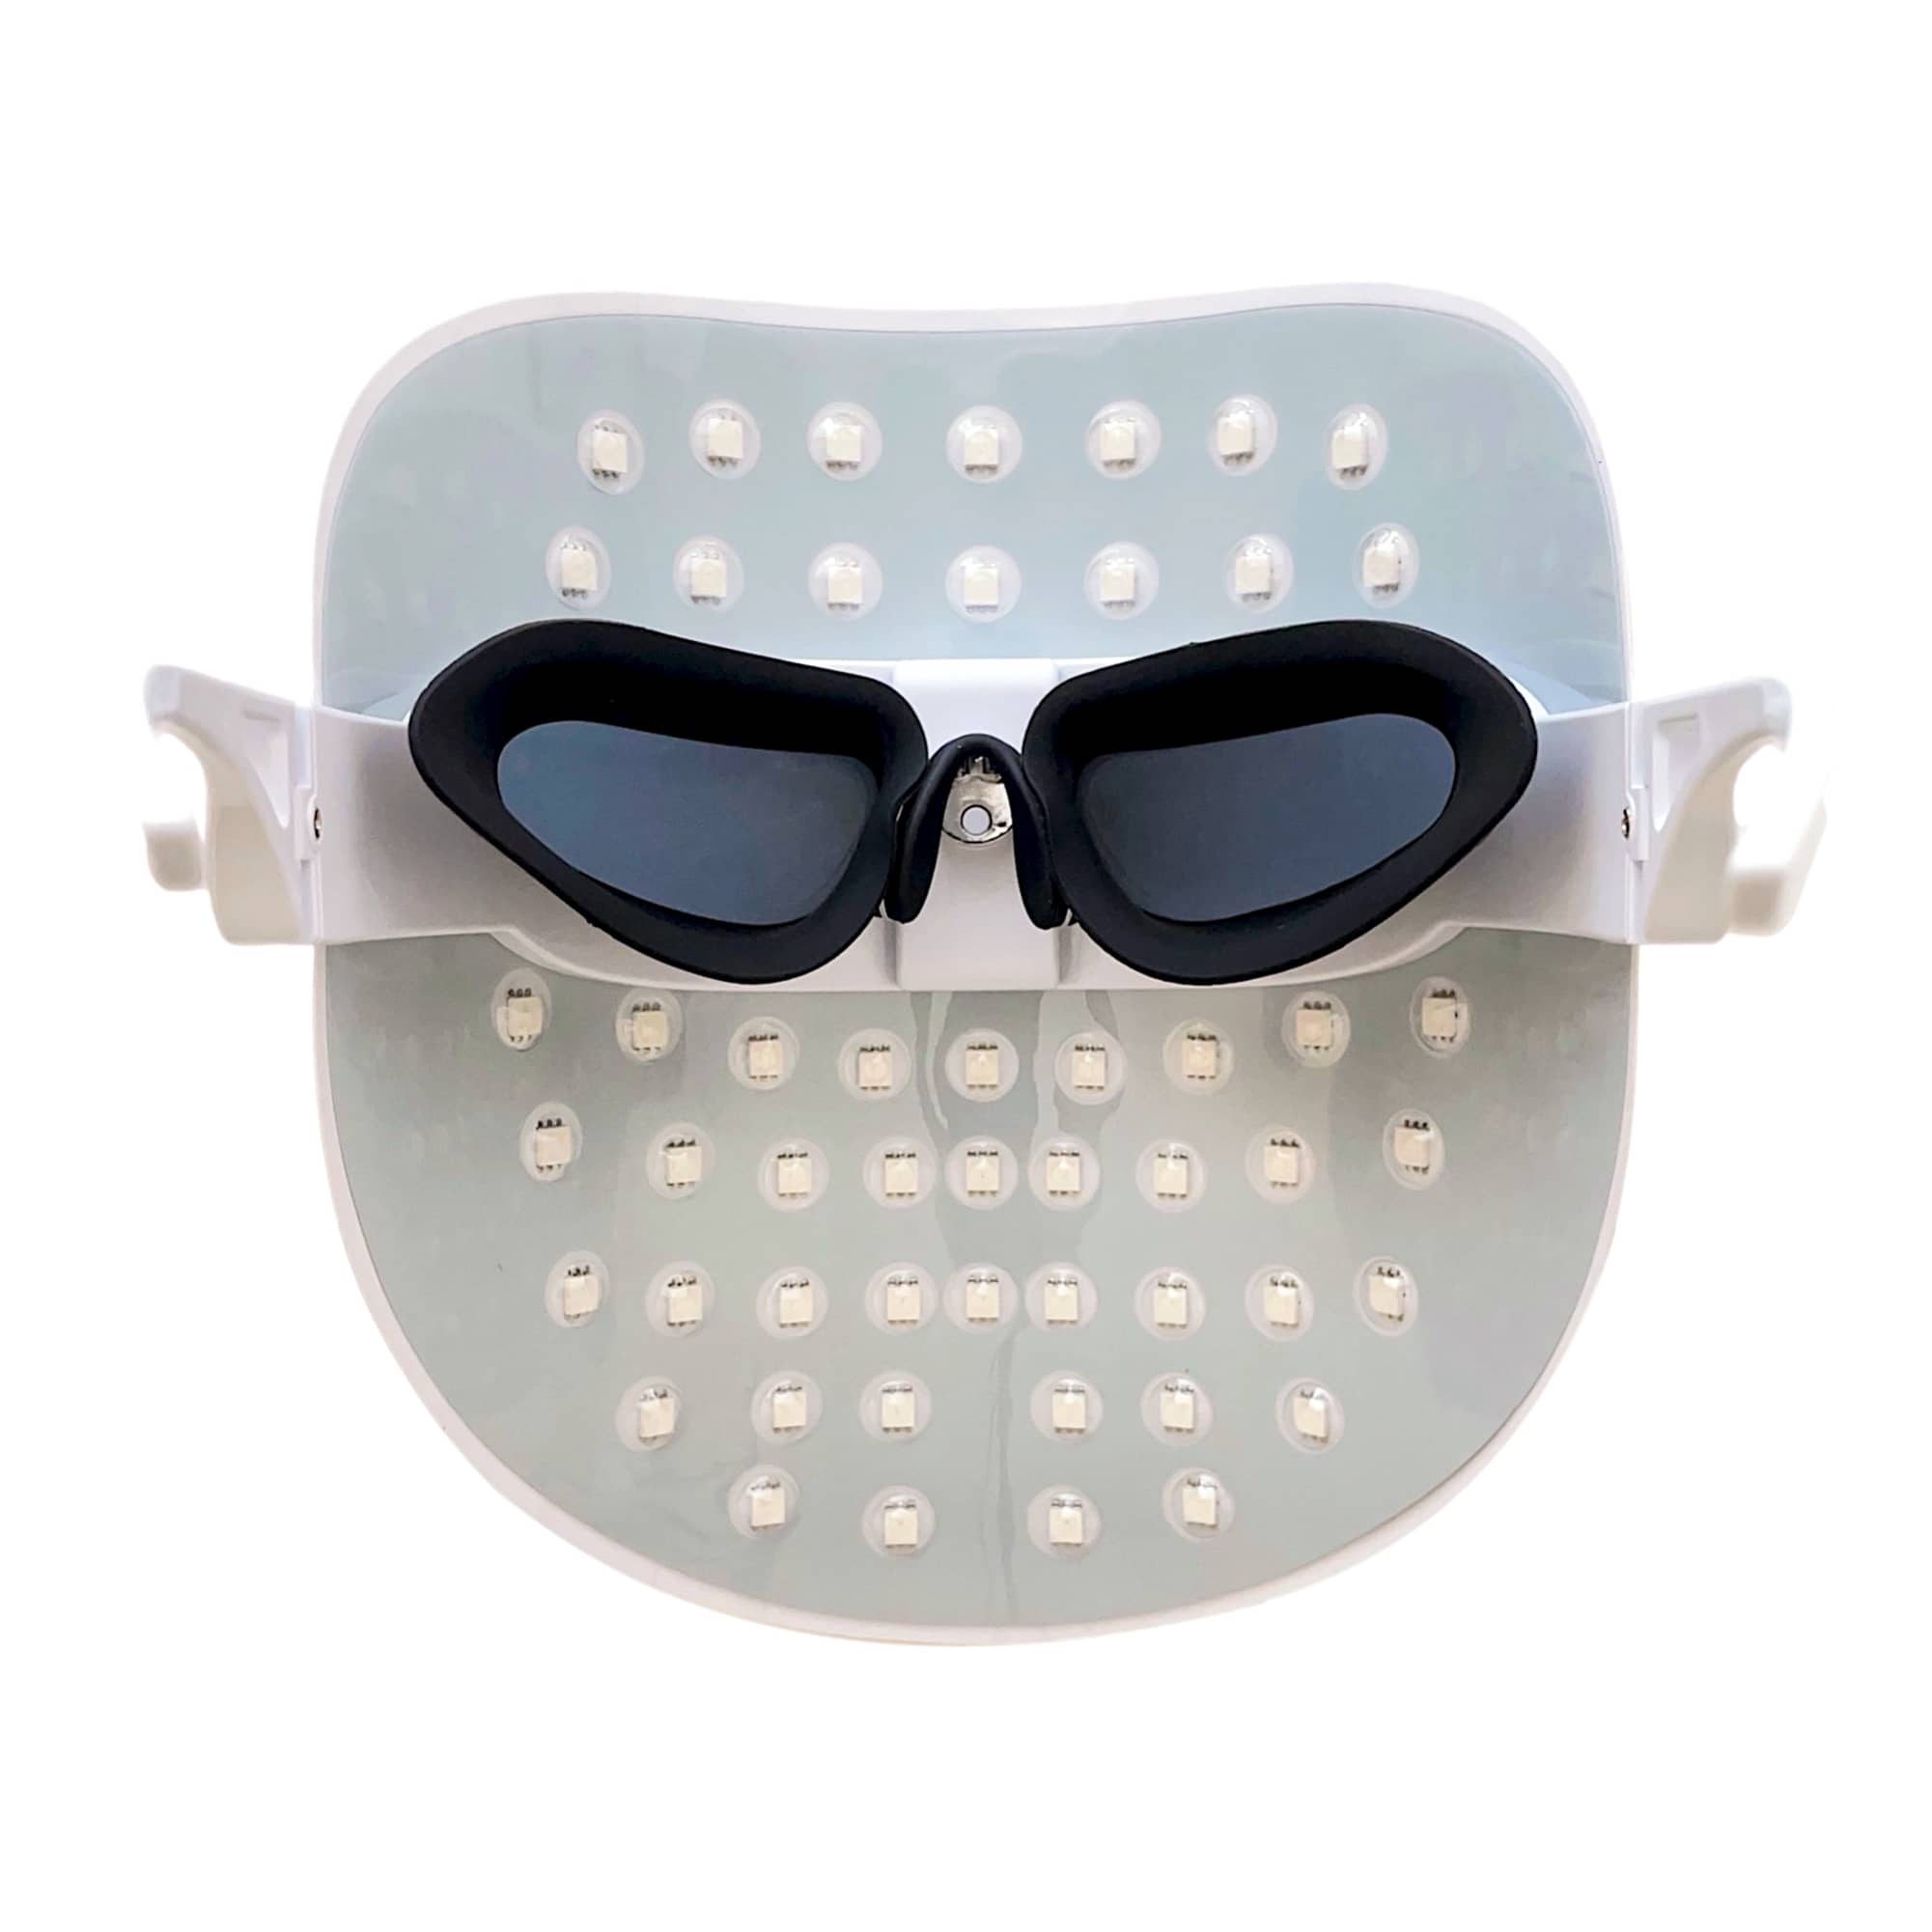 High quality LED Light Therapy Mask LITE